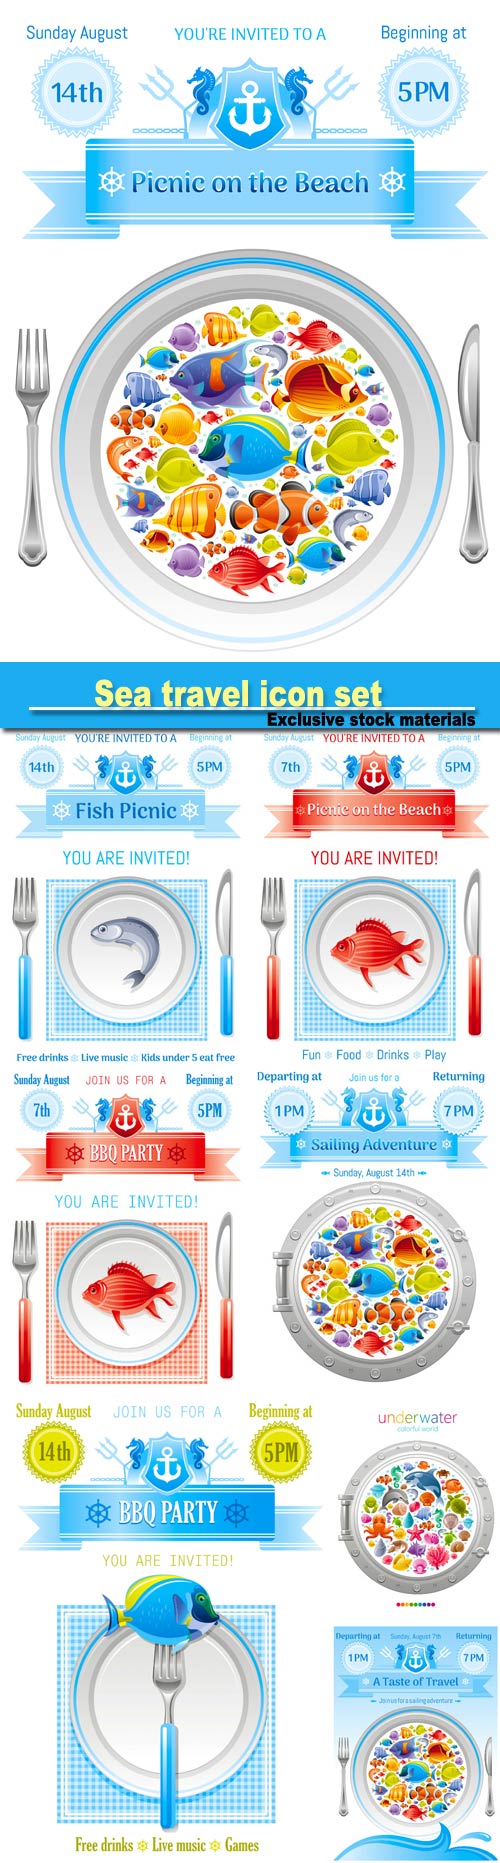 Sea travel icon set with underwater diving animals, dolphin, killer whale, starfish, coral, oyster pearl